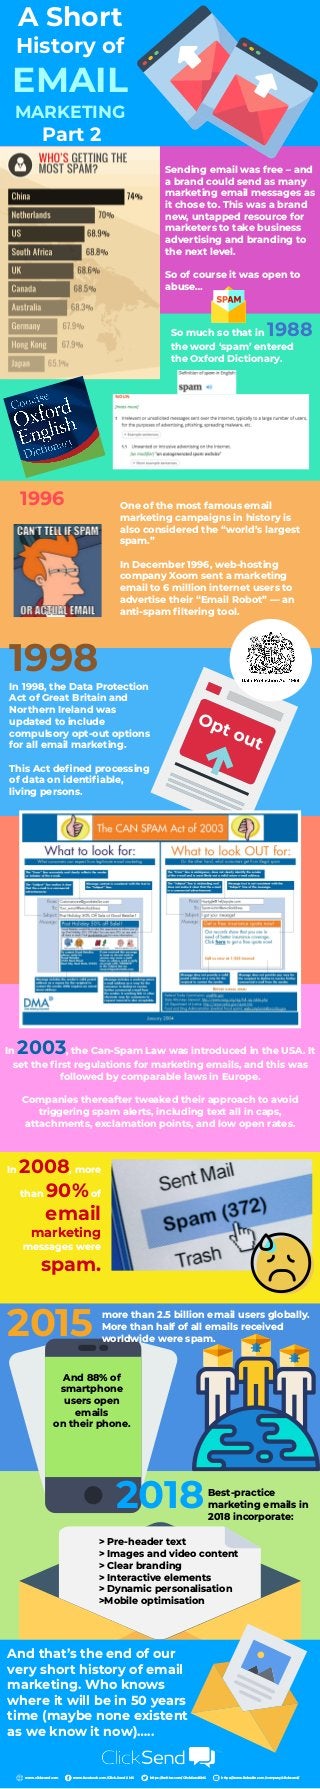 A Short
History of
EMAIL
MARKETING
Sending email was free – and
a brand could send as many
marketing email messages as
it chose to. This was a brand
new, untapped resource for
marketers to take business
advertising and branding to
the next level.
So of course it was open to
abuse…
So much so that in 1988
the word ‘spam’ entered
the Oxford Dictionary.
In 1998, the Data Protection
Act of Great Britain and
Northern Ireland was
updated to include
compulsory opt-out options
for all email marketing.
This Act deﬁned processing
of data on identiﬁable,
living persons.
In 2003, the Can-Spam Law was introduced in the USA. It
set the ﬁrst regulations for marketing emails, and this was
followed by comparable laws in Europe.
Companies thereafter tweaked their approach to avoid
triggering spam alerts, including text all in caps,
attachments, exclamation points, and low open rates.
In 2008, more
than 90%of
email
marketing
messages were
spam.
One of the most famous email
marketing campaigns in history is
also considered the “world’s largest
spam.”
In December 1996, web-hosting
company Xoom sent a marketing
email to 6 million internet users to
advertise their “Email Robot” — an
anti-spam ﬁltering tool.
Part 2
1996
1998
2015
And 88% of
smartphone
users open
emails
on their phone.
2018Best-practice
marketing emails in
2018 incorporate:
more than 2.5 billion email users globally.
More than half of all emails received
worldwide were spam.
> Pre-header text
> Images and video content
> Clear branding
> Interactive elements
> Dynamic personalisation
>Mobile optimisation
And that’s the end of our
very short history of email
marketing. Who knows
where it will be in 50 years
time (maybe none existent
as we know it now)…..
www.clicksend.com www.facebook.com/Click.Send.SMS https://twitter.com/ClickSendSMS https://www.linkedin.com/company/clicksend/
 